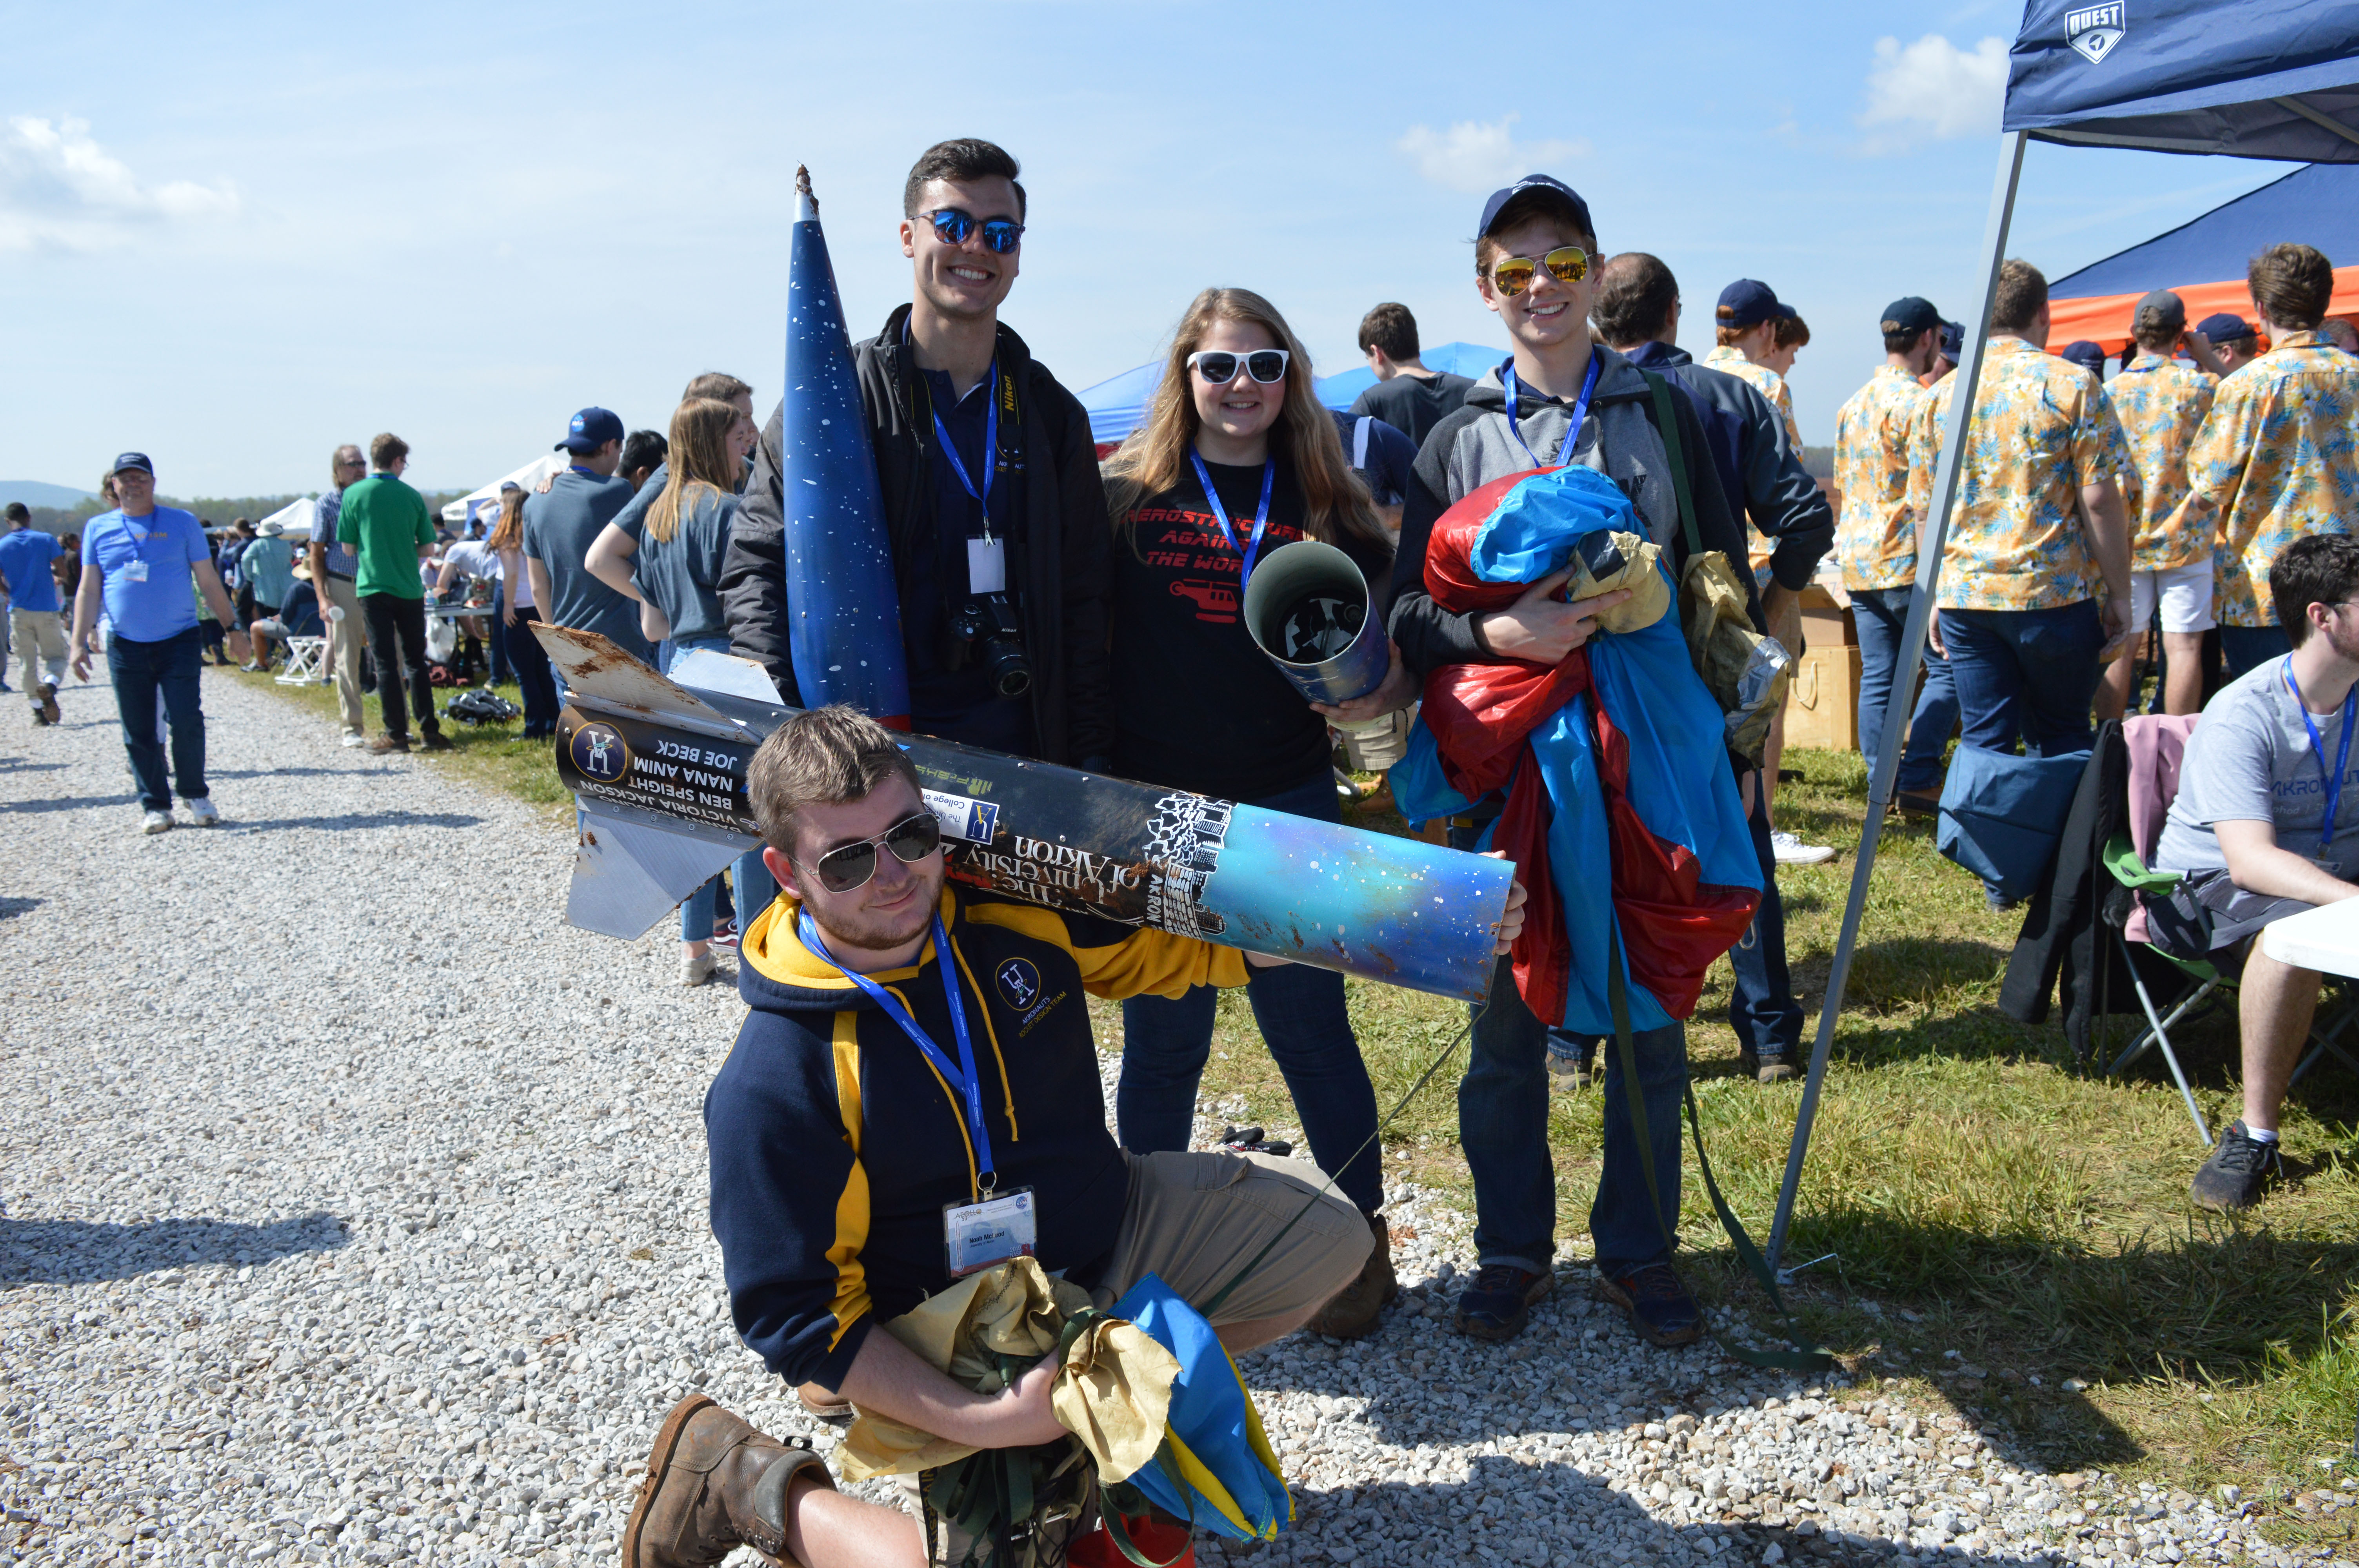 Members of the student rocket design team and the rocket they designed